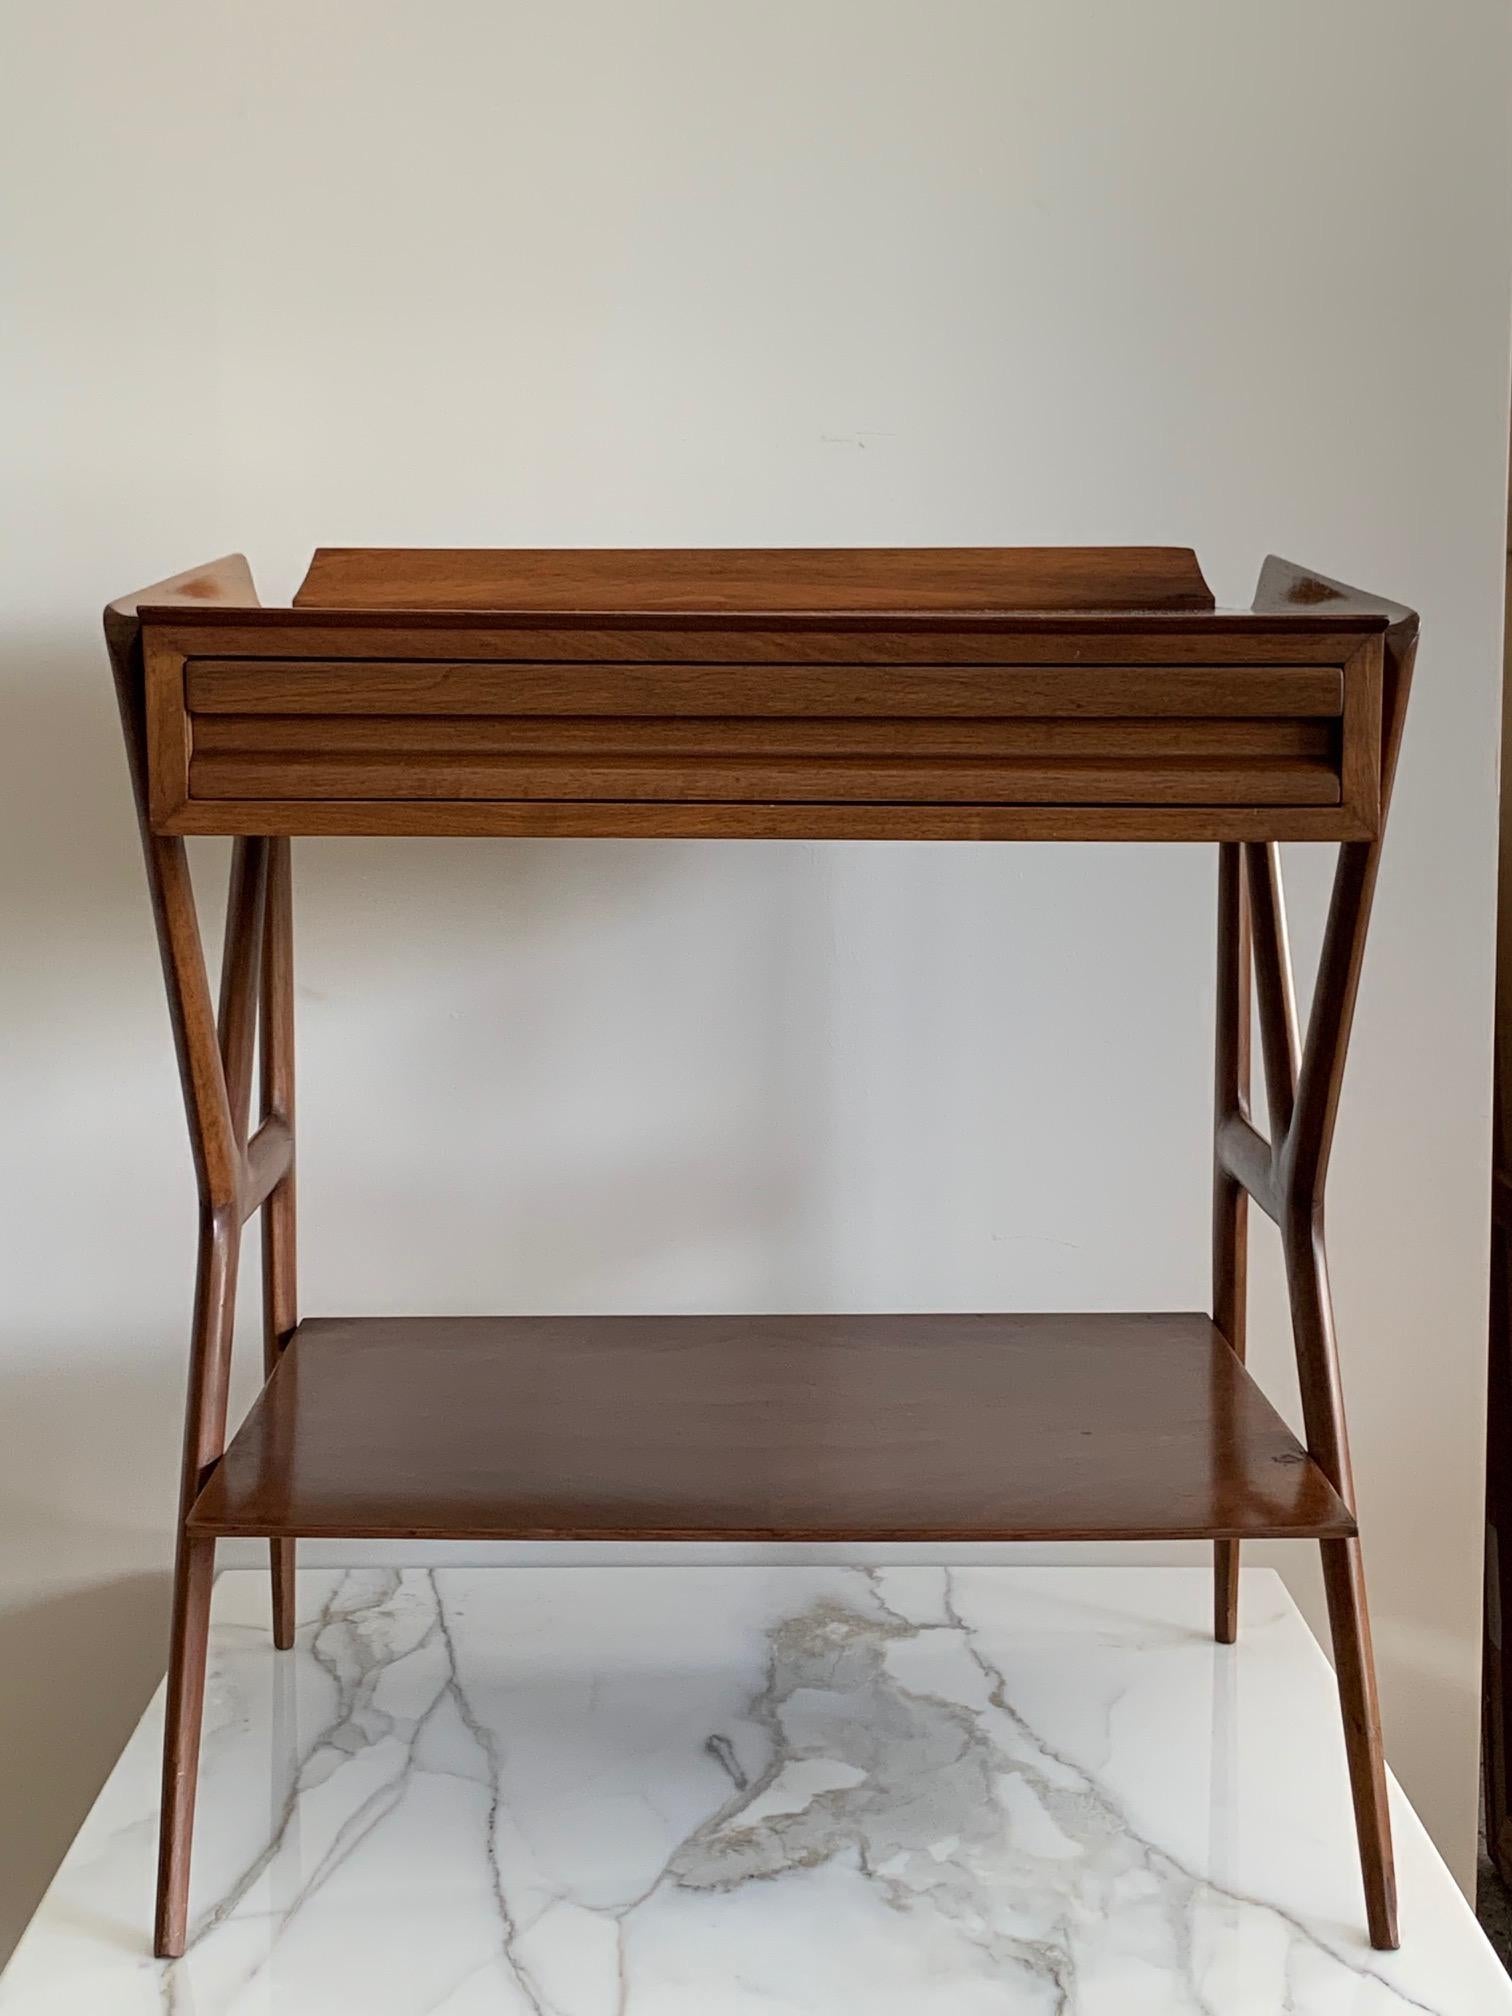 An unusual and rare occasional table by Ico Parisi, circa early 1950s. Pull out drawer, galley top, lower shelf with organic legs typical of Ico Parisi.